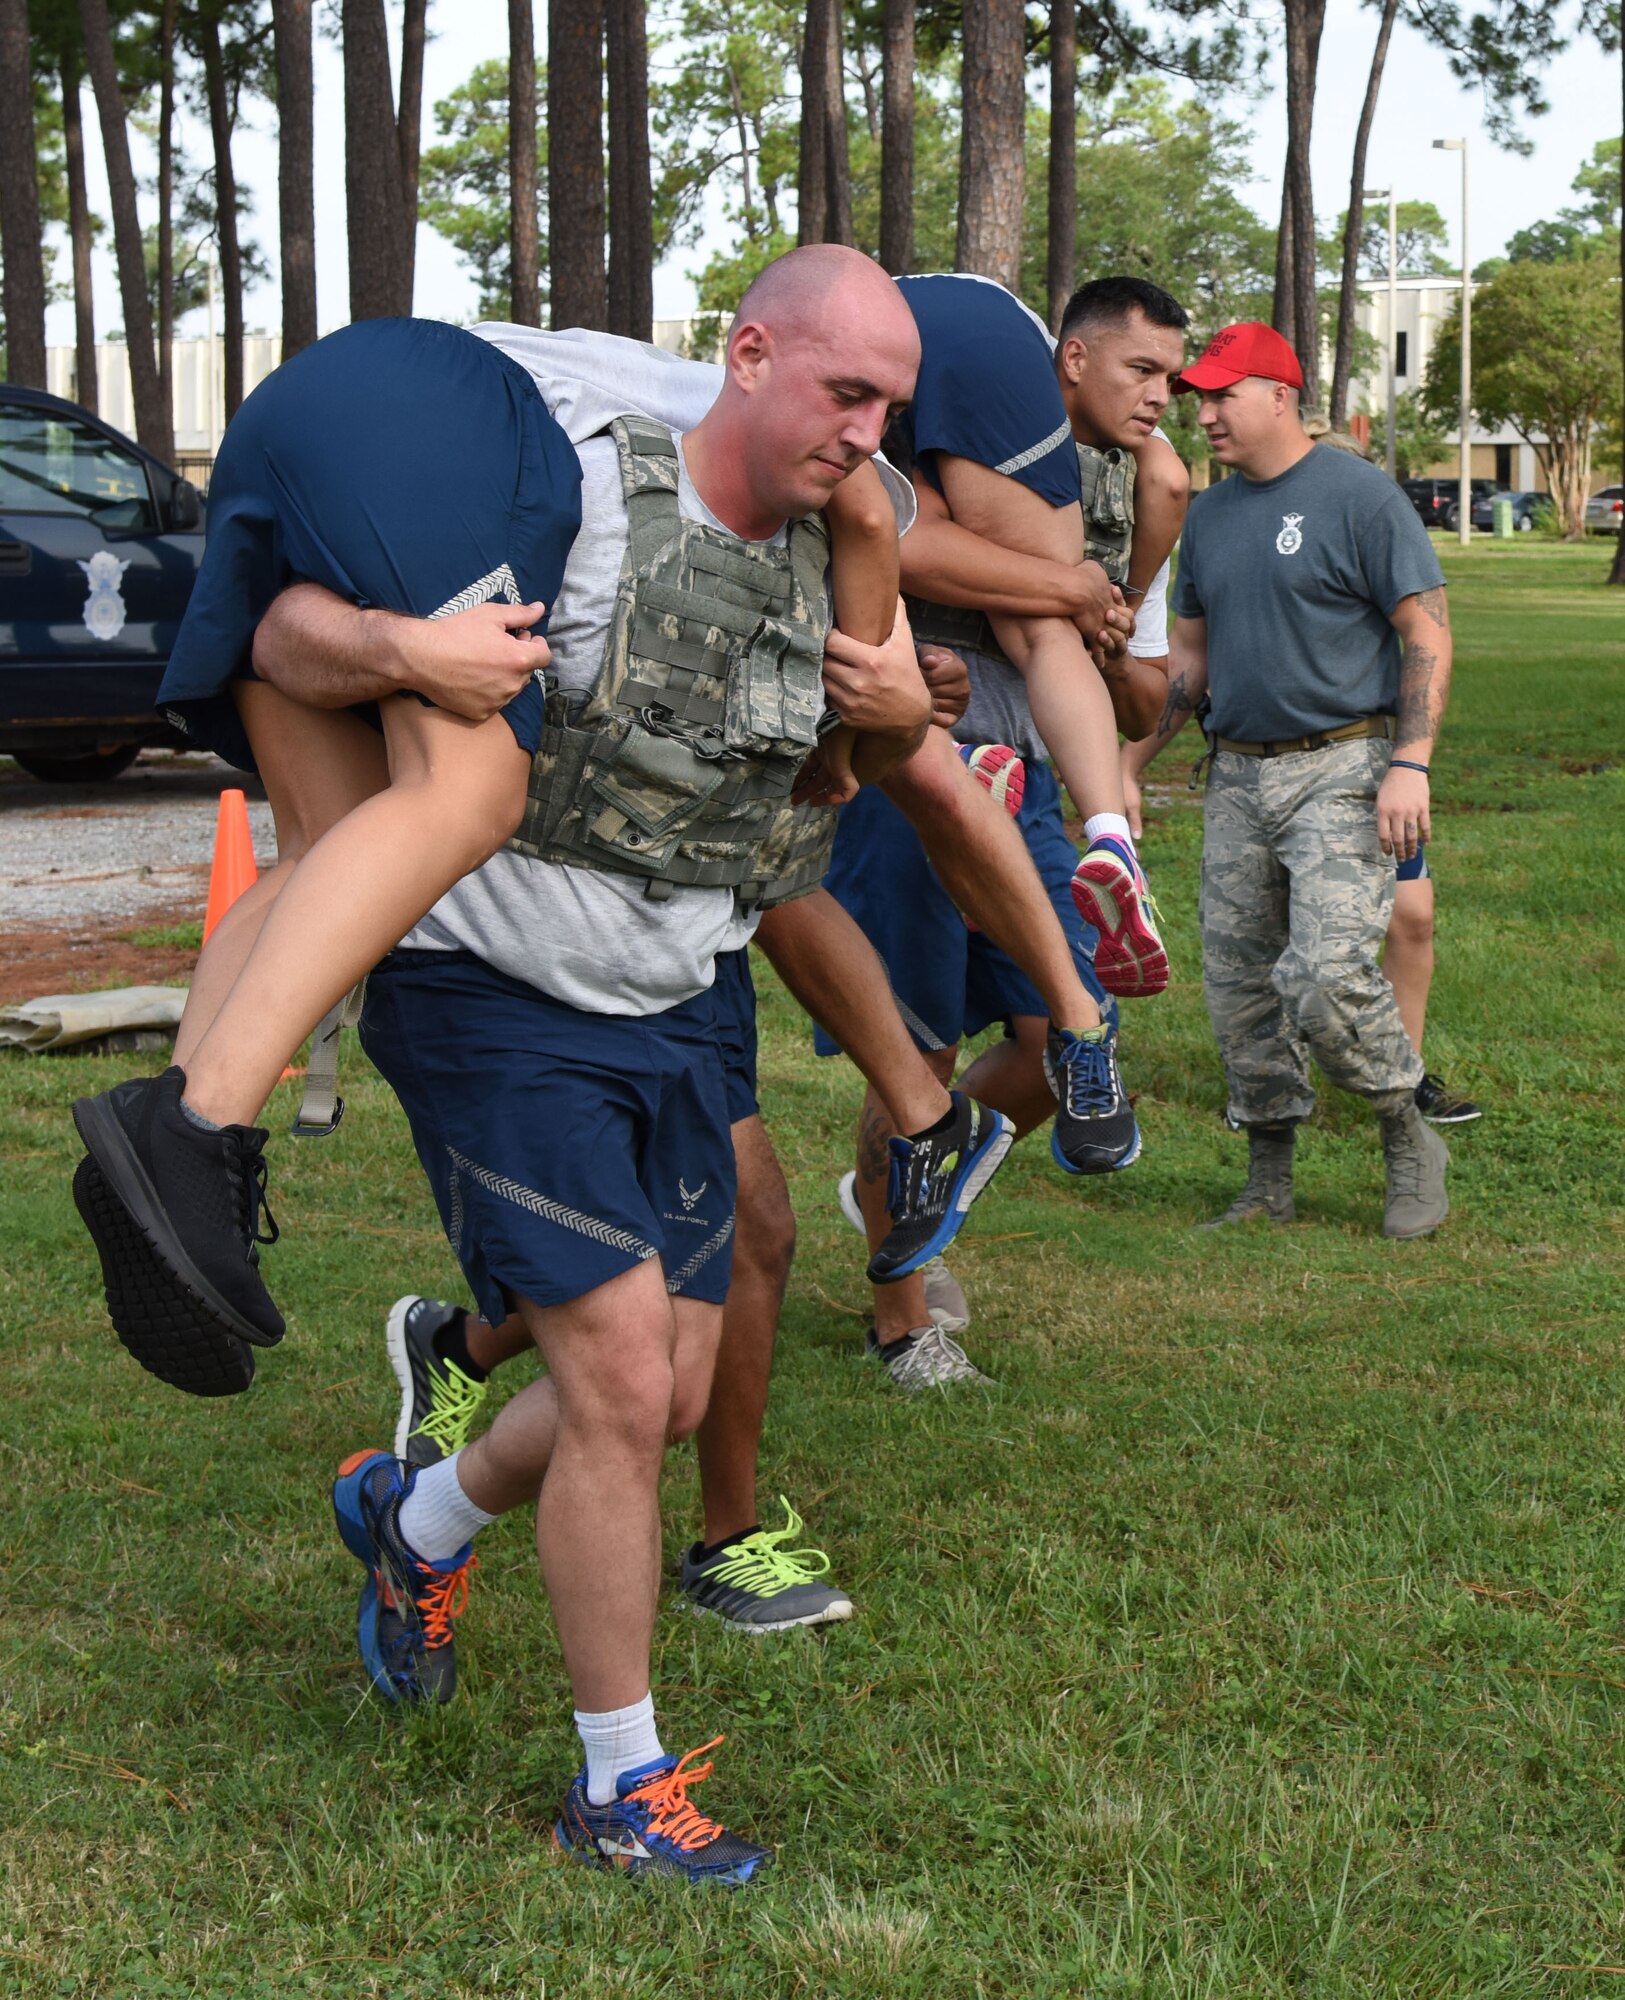 Team Five members carry their team to the next challenge during the Senior Noncommissioned Officer Professional Enhancement Seminar Warrior Challenge Aug. 25, 2017, on Keesler Air Force Base, Mississippi. Keesler’s newest SNCOs also participated in physical strength activities as well as answering trivia questions about Keesler AFB and enlisted history. (U.S. Air Force photo by Kemberly Groue)